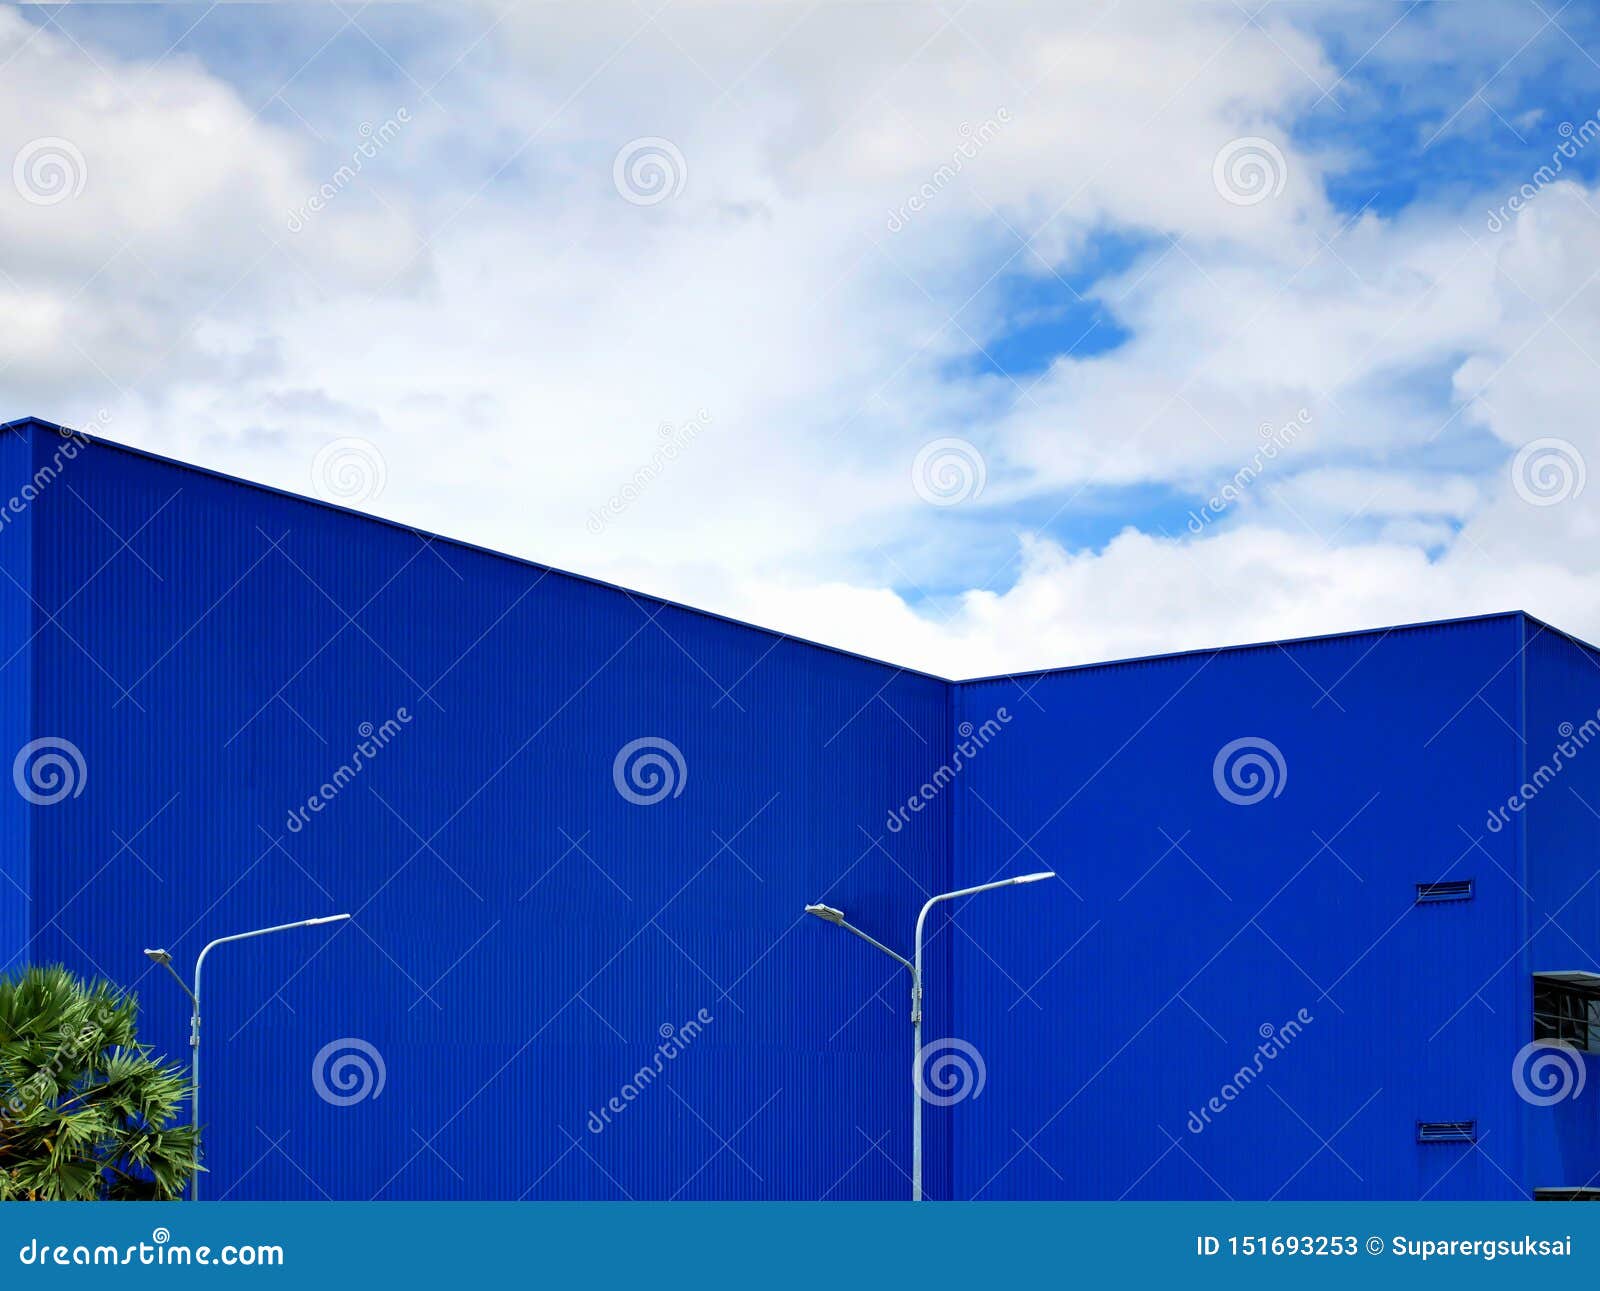 Blue Warehouse Building Exterior Against Blue Cloudy Sky Stock Image ...